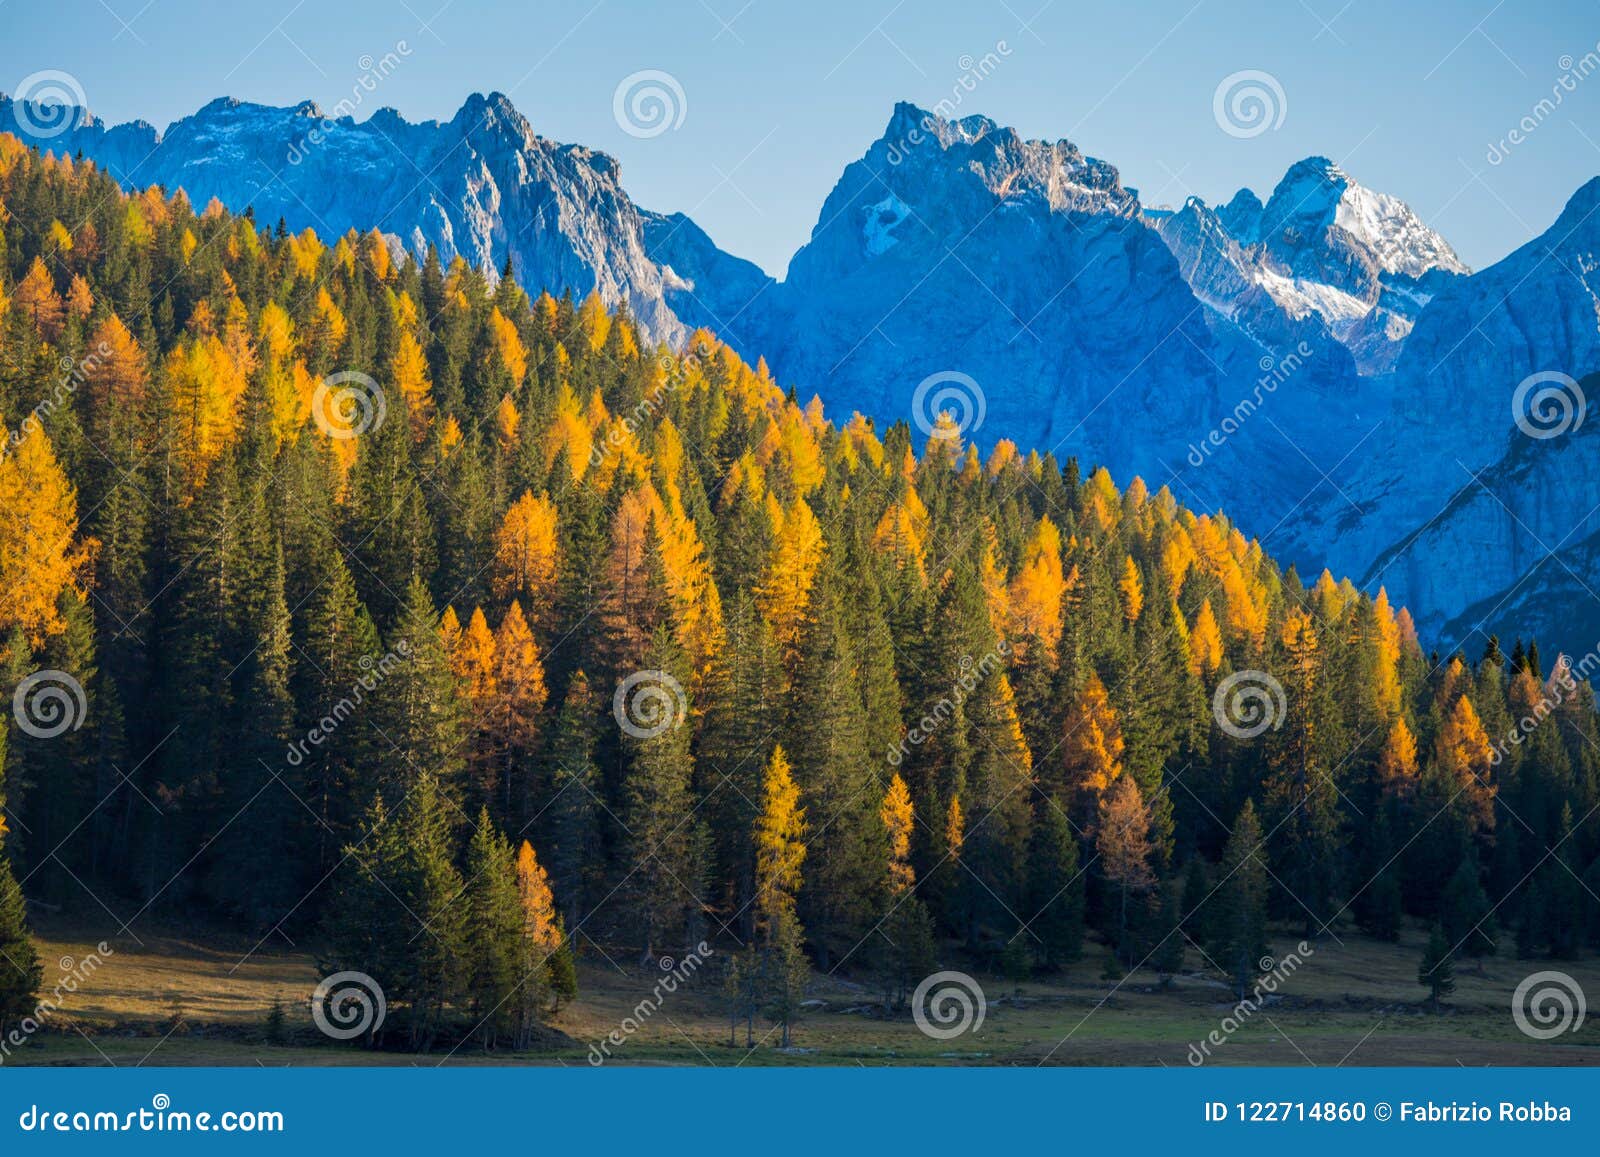 autumn landscape in dolomites, italy. mountains, fir trees and larches that change color assuming the typical yellow autumn color.